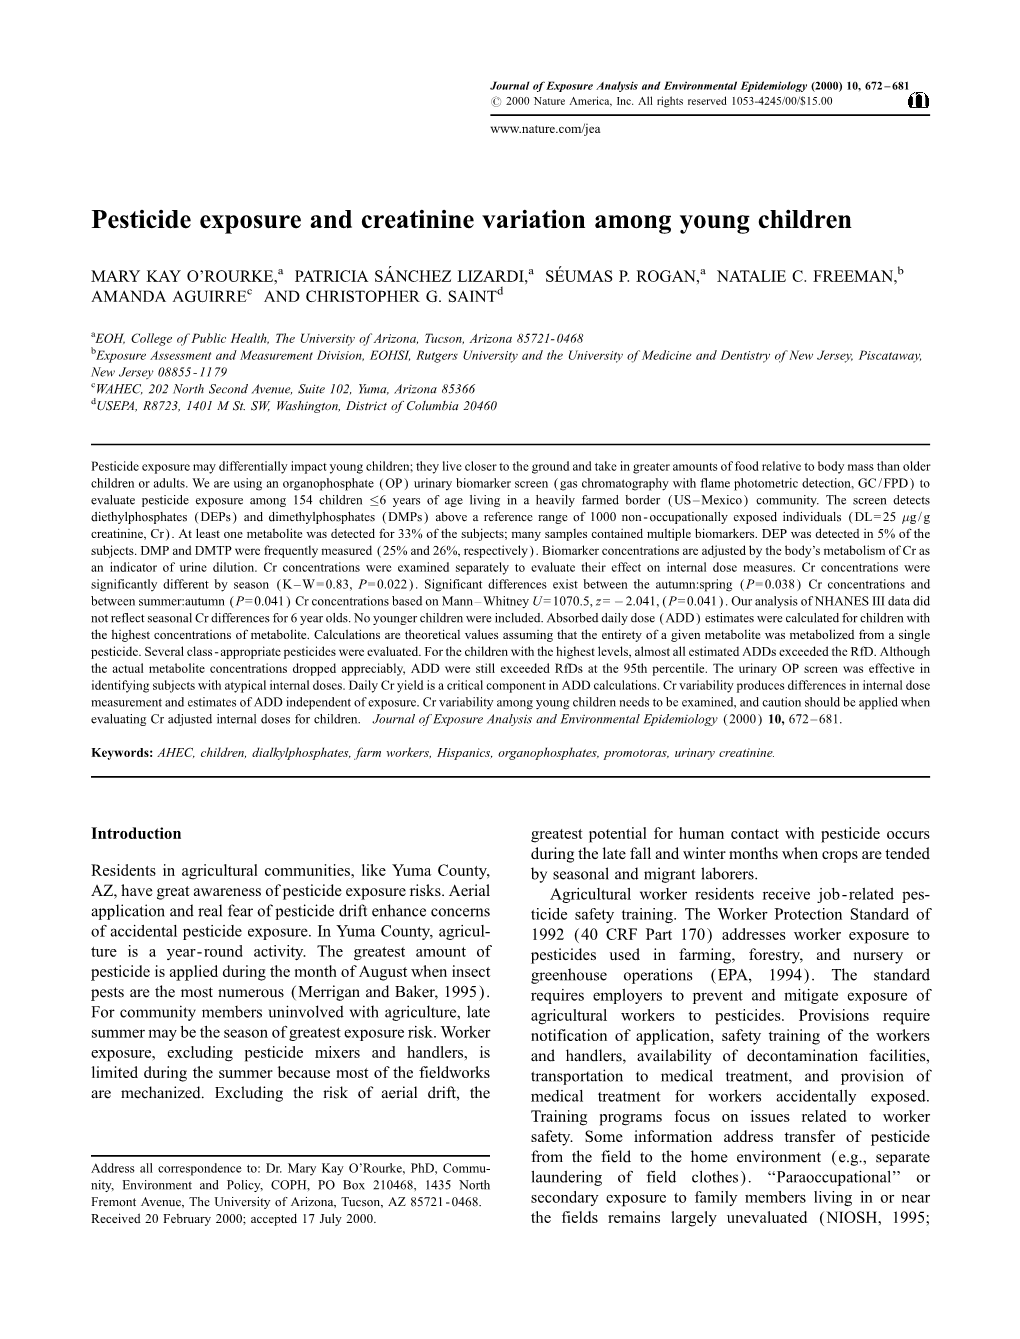 Pesticide Exposure and Creatinine Variation Among Young Children